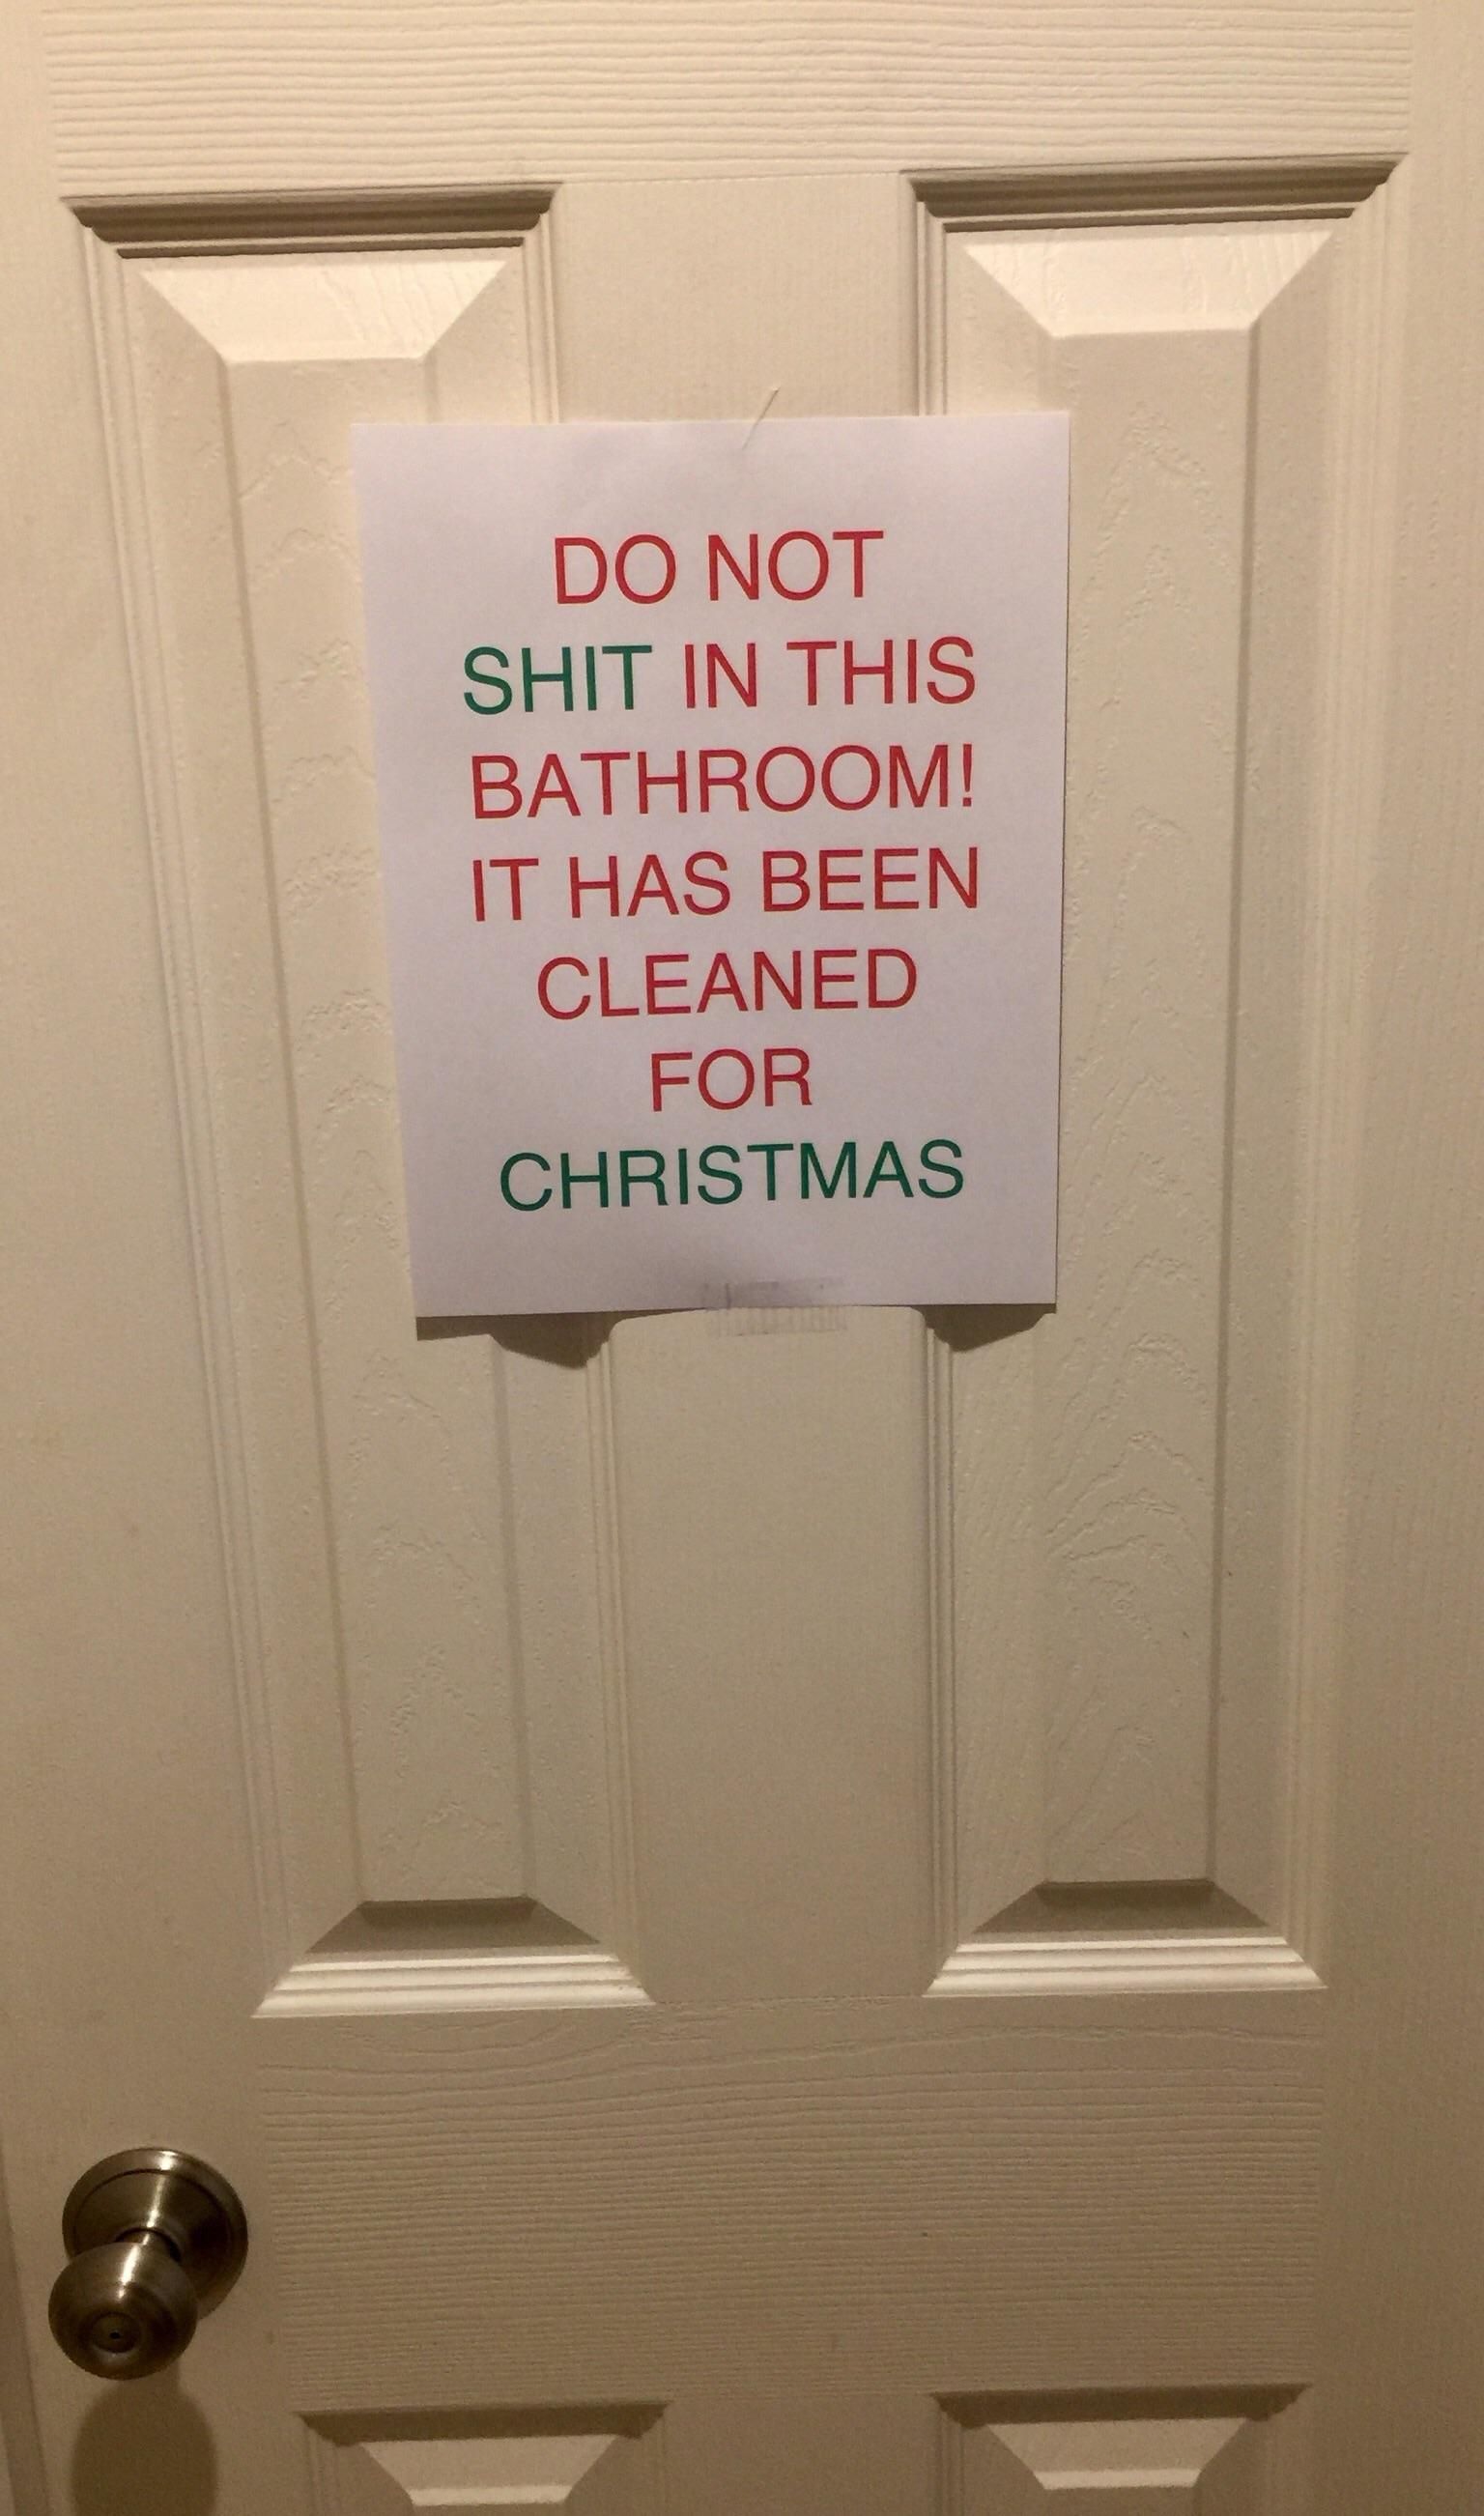 My girlfriend is taking this hosting Christmas thing a bit too far...